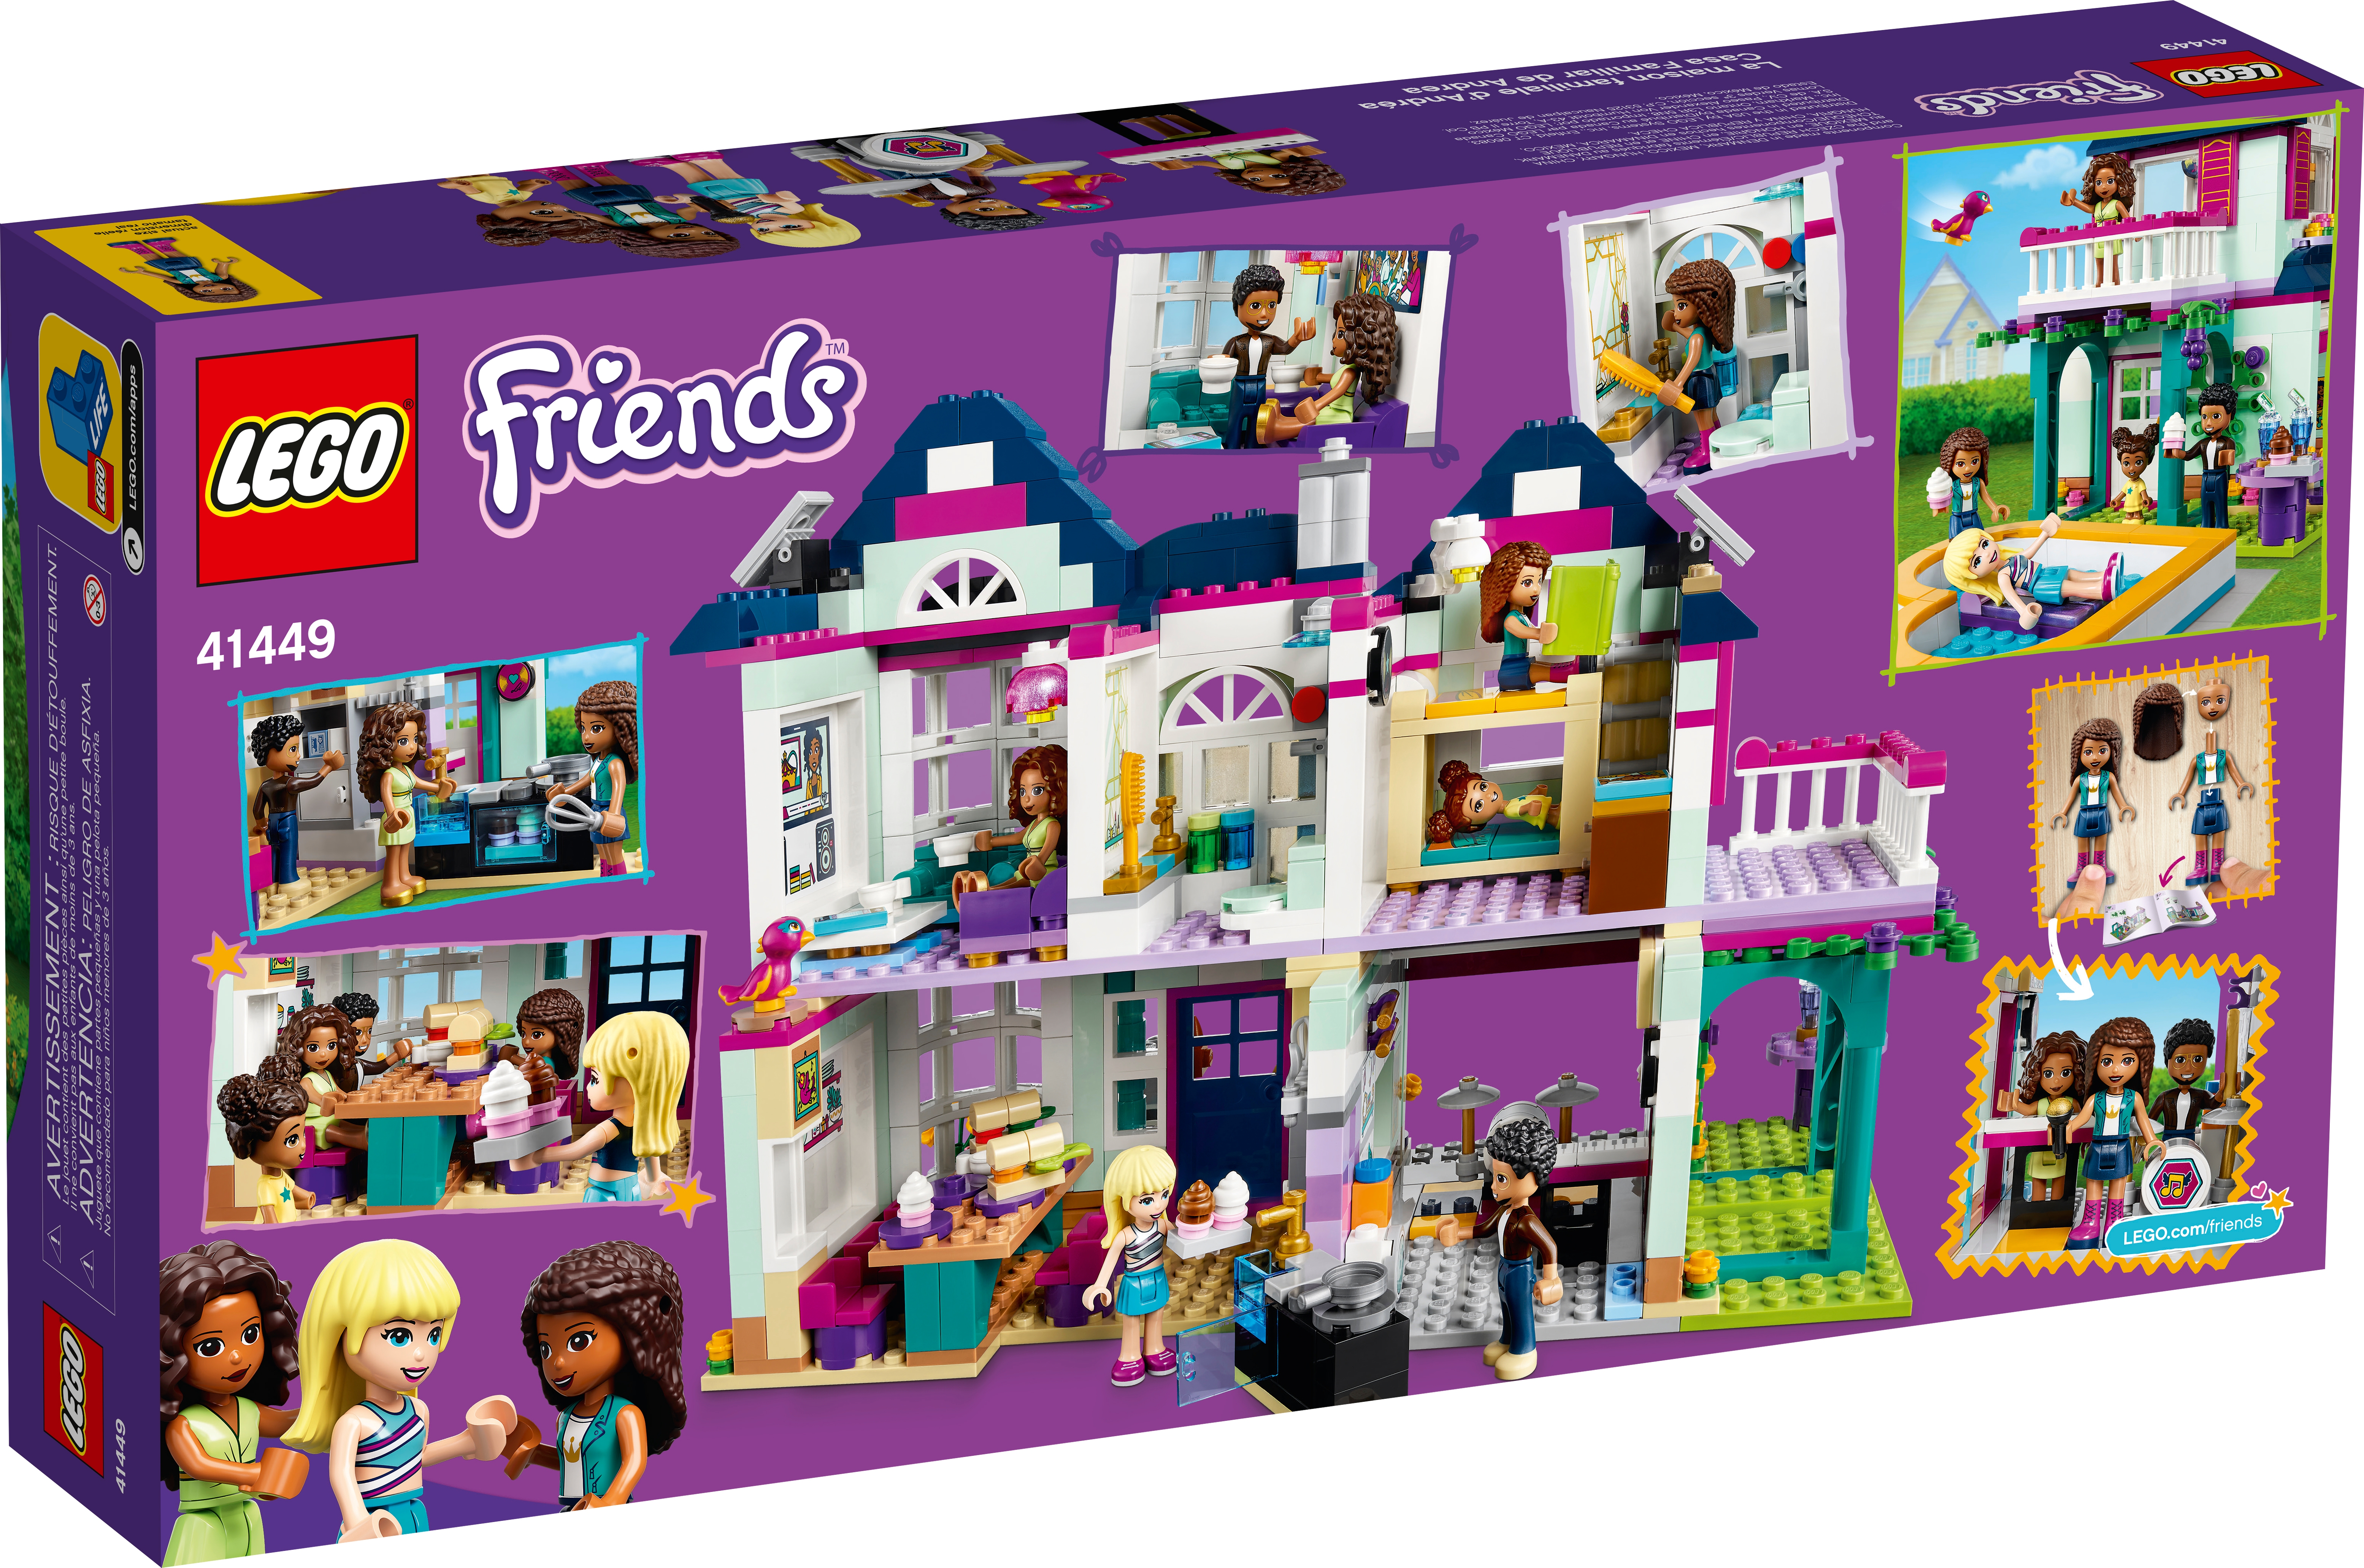 Lego Friends STICKER SHEET ONLY for Lego set 41449 Andrea's Family House New